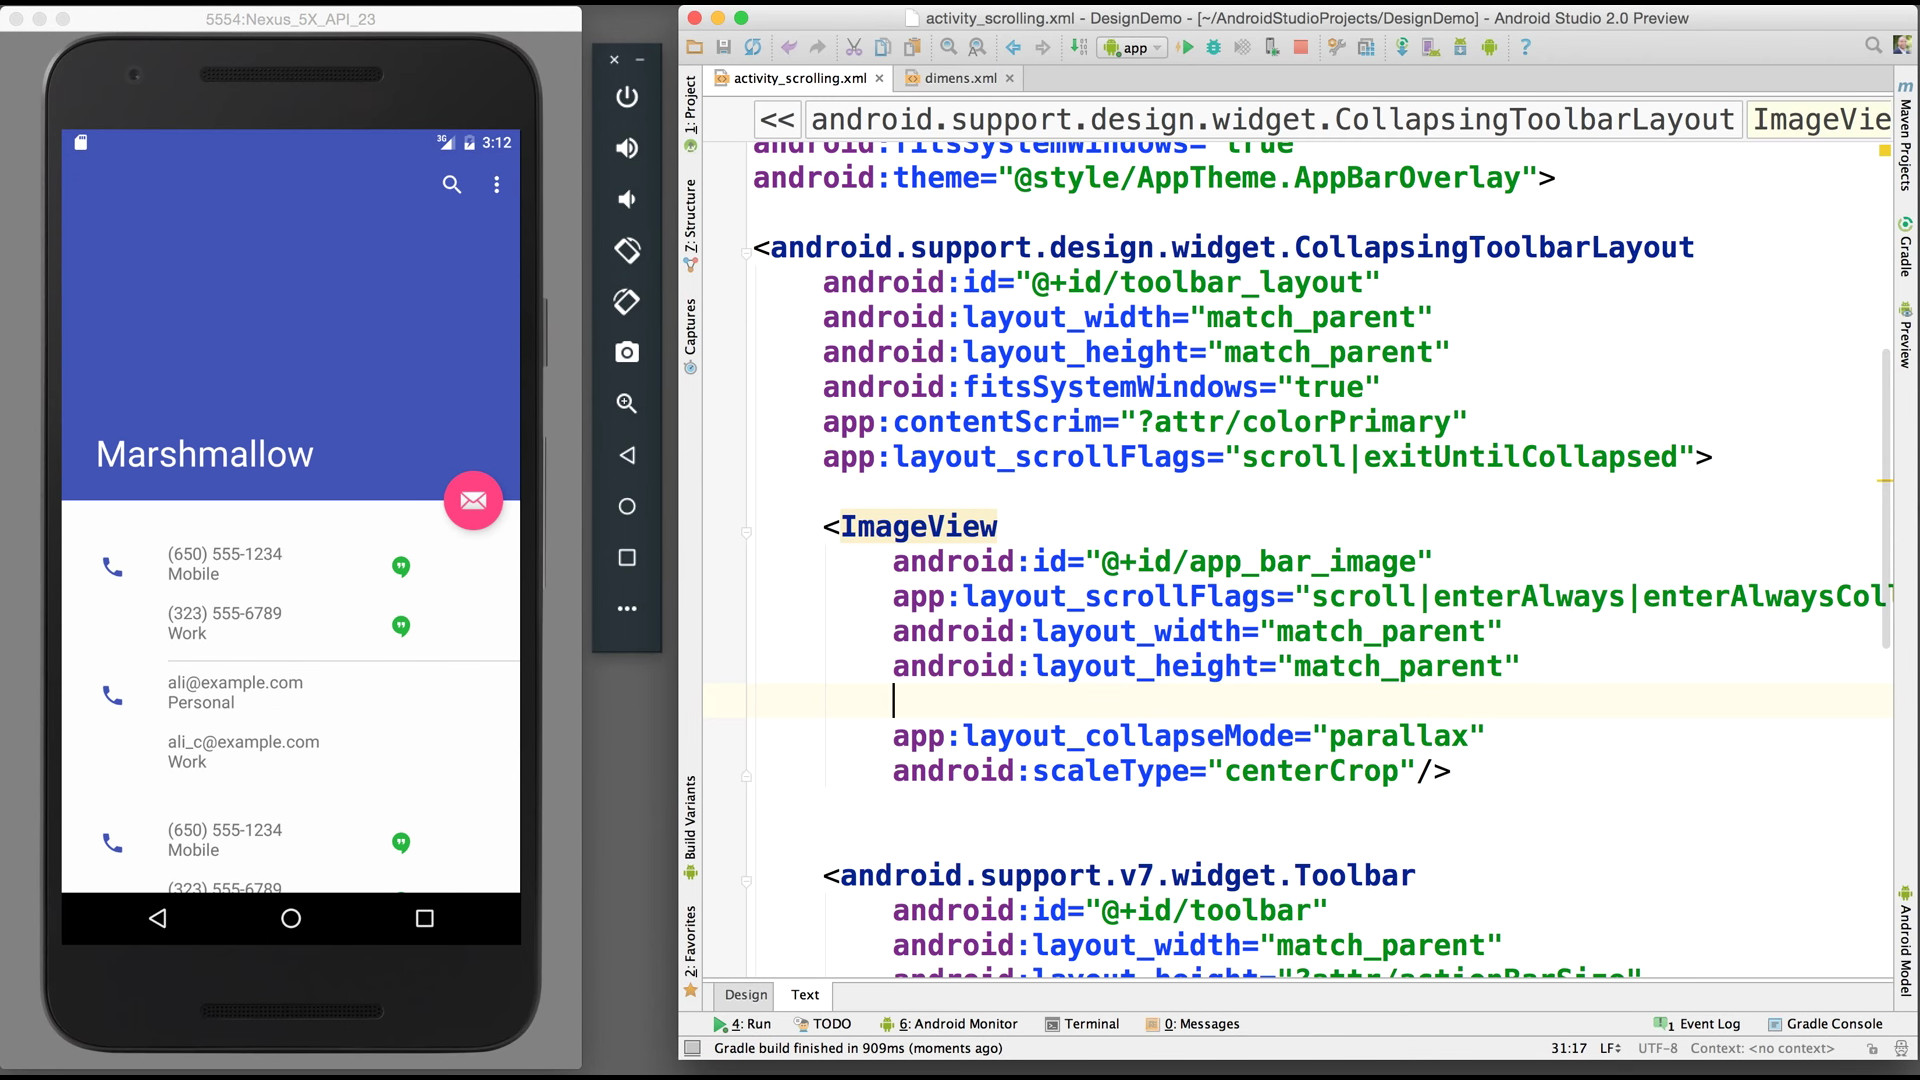 Android Studio 2.0 Preview